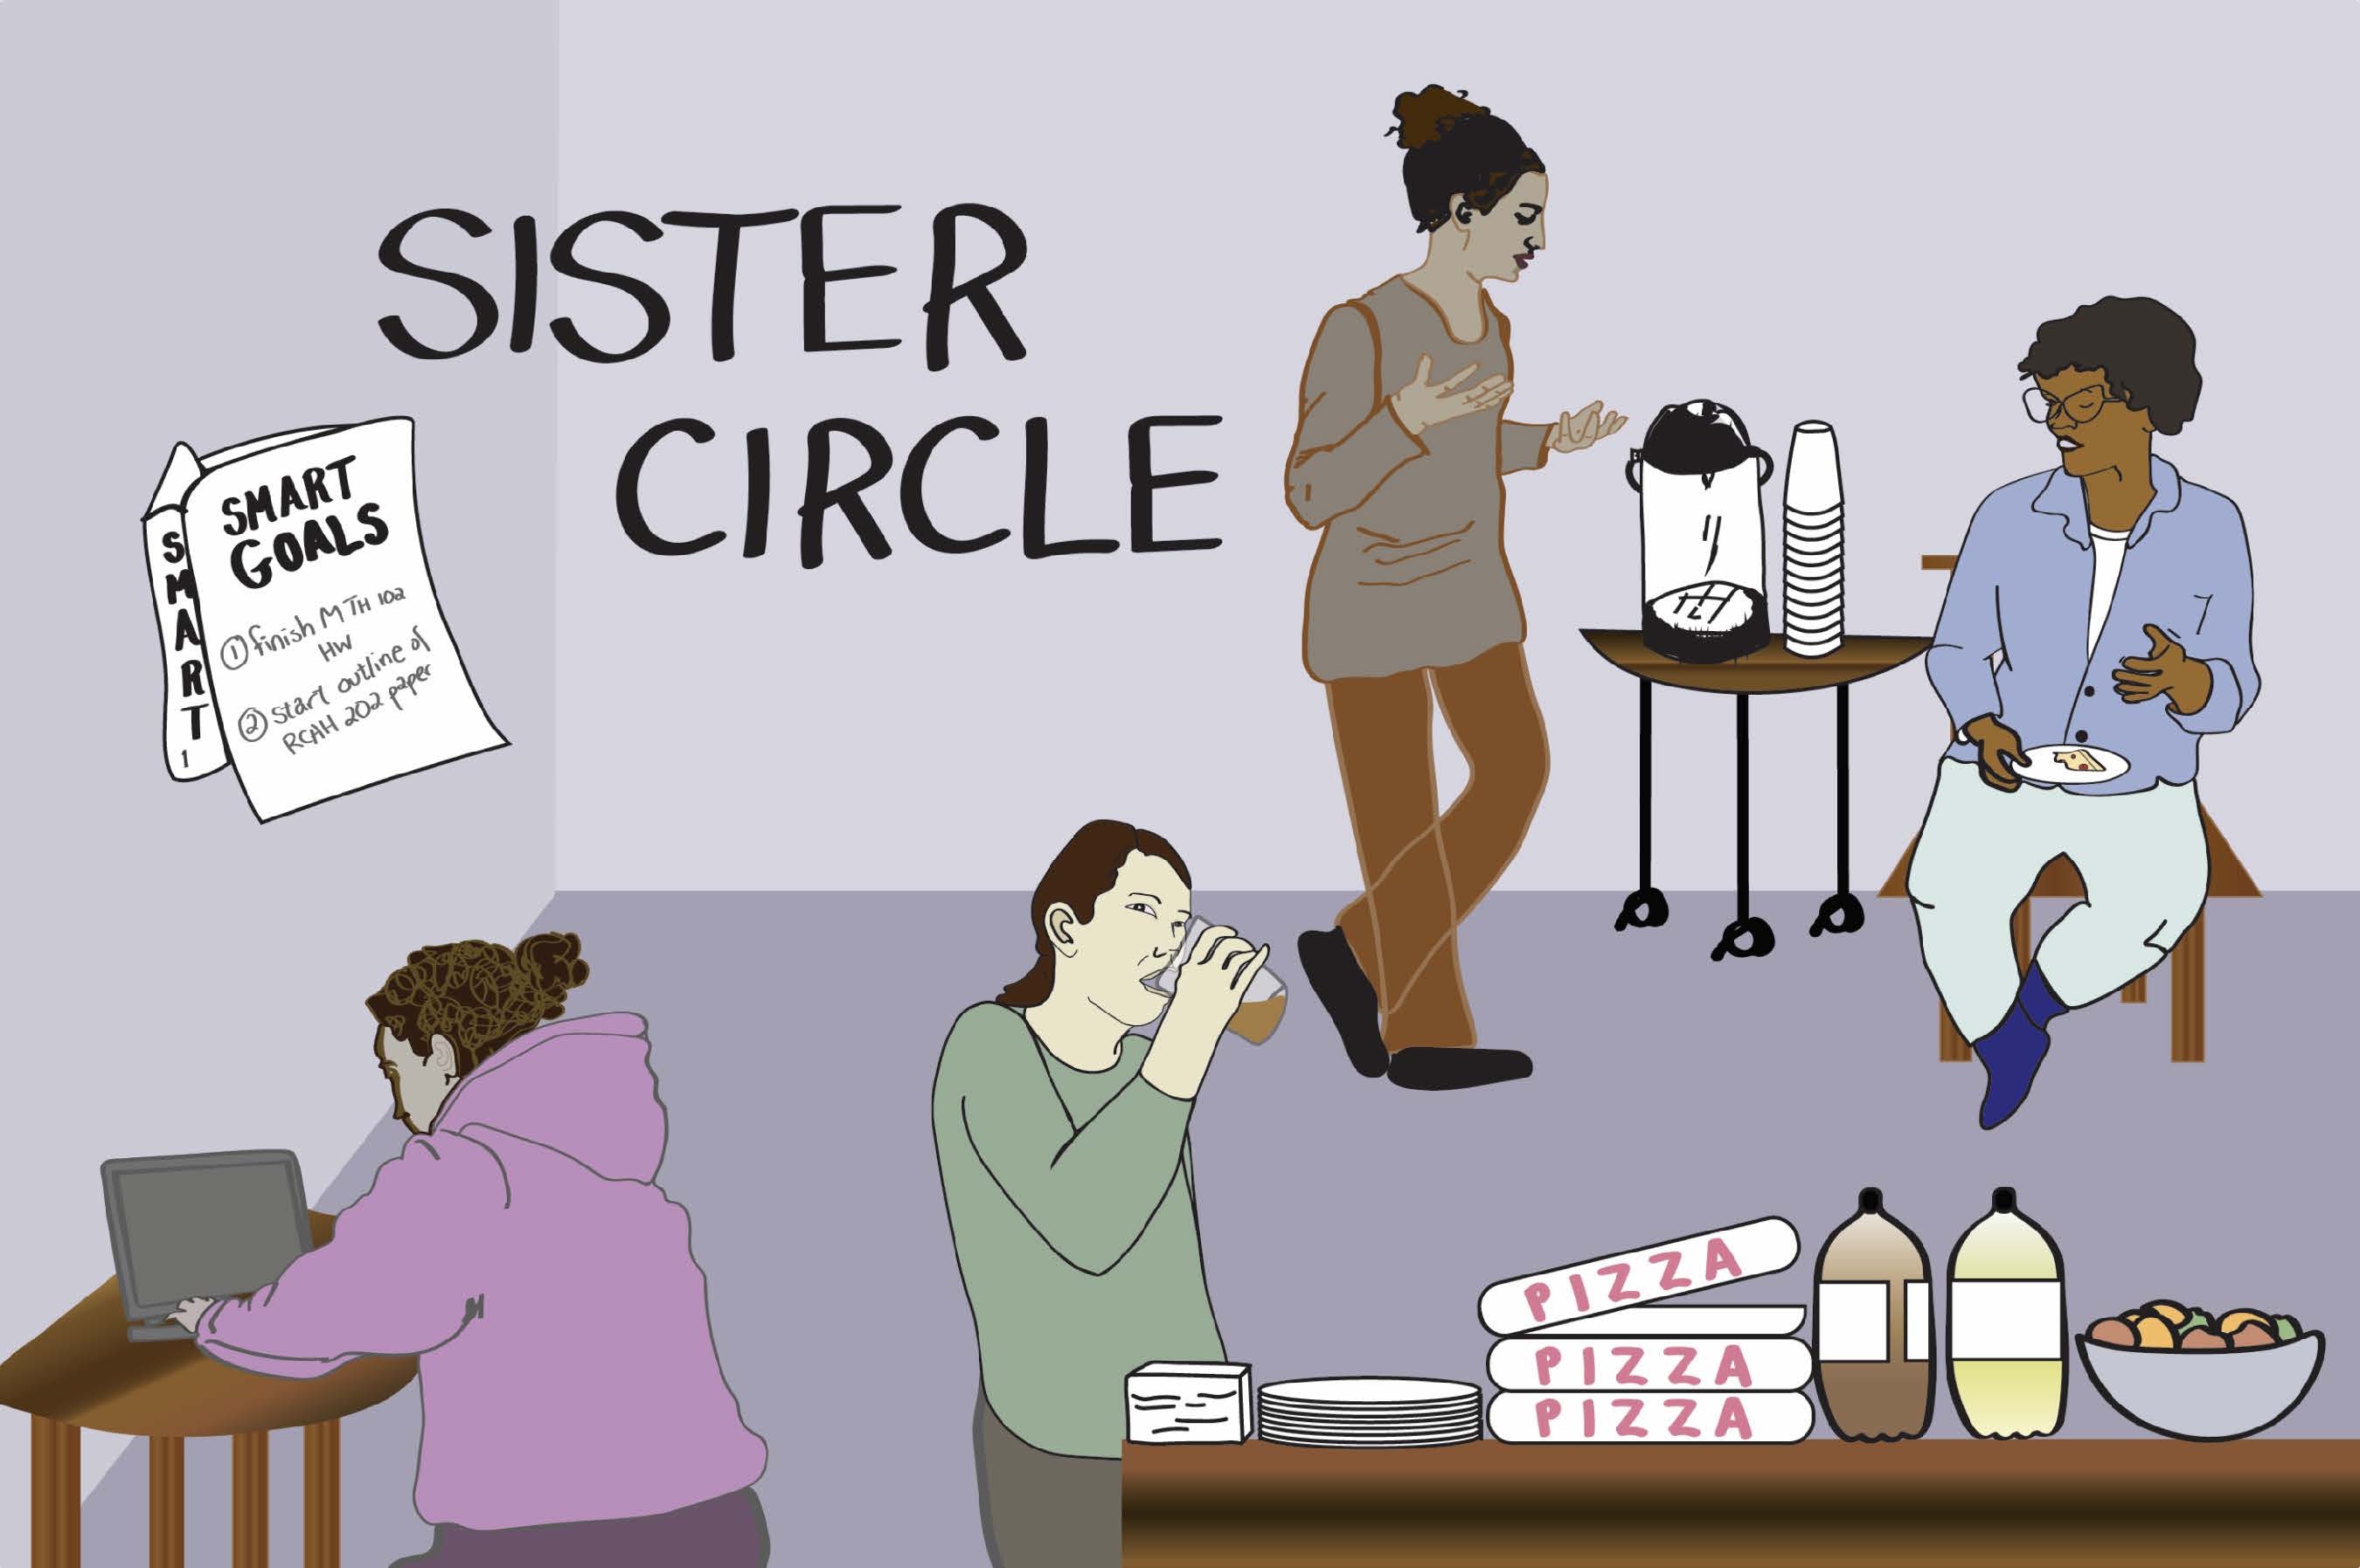 Image shows an illustration of four women of color in a classroom space, getting coffee and donuts, and having discussions with one another.